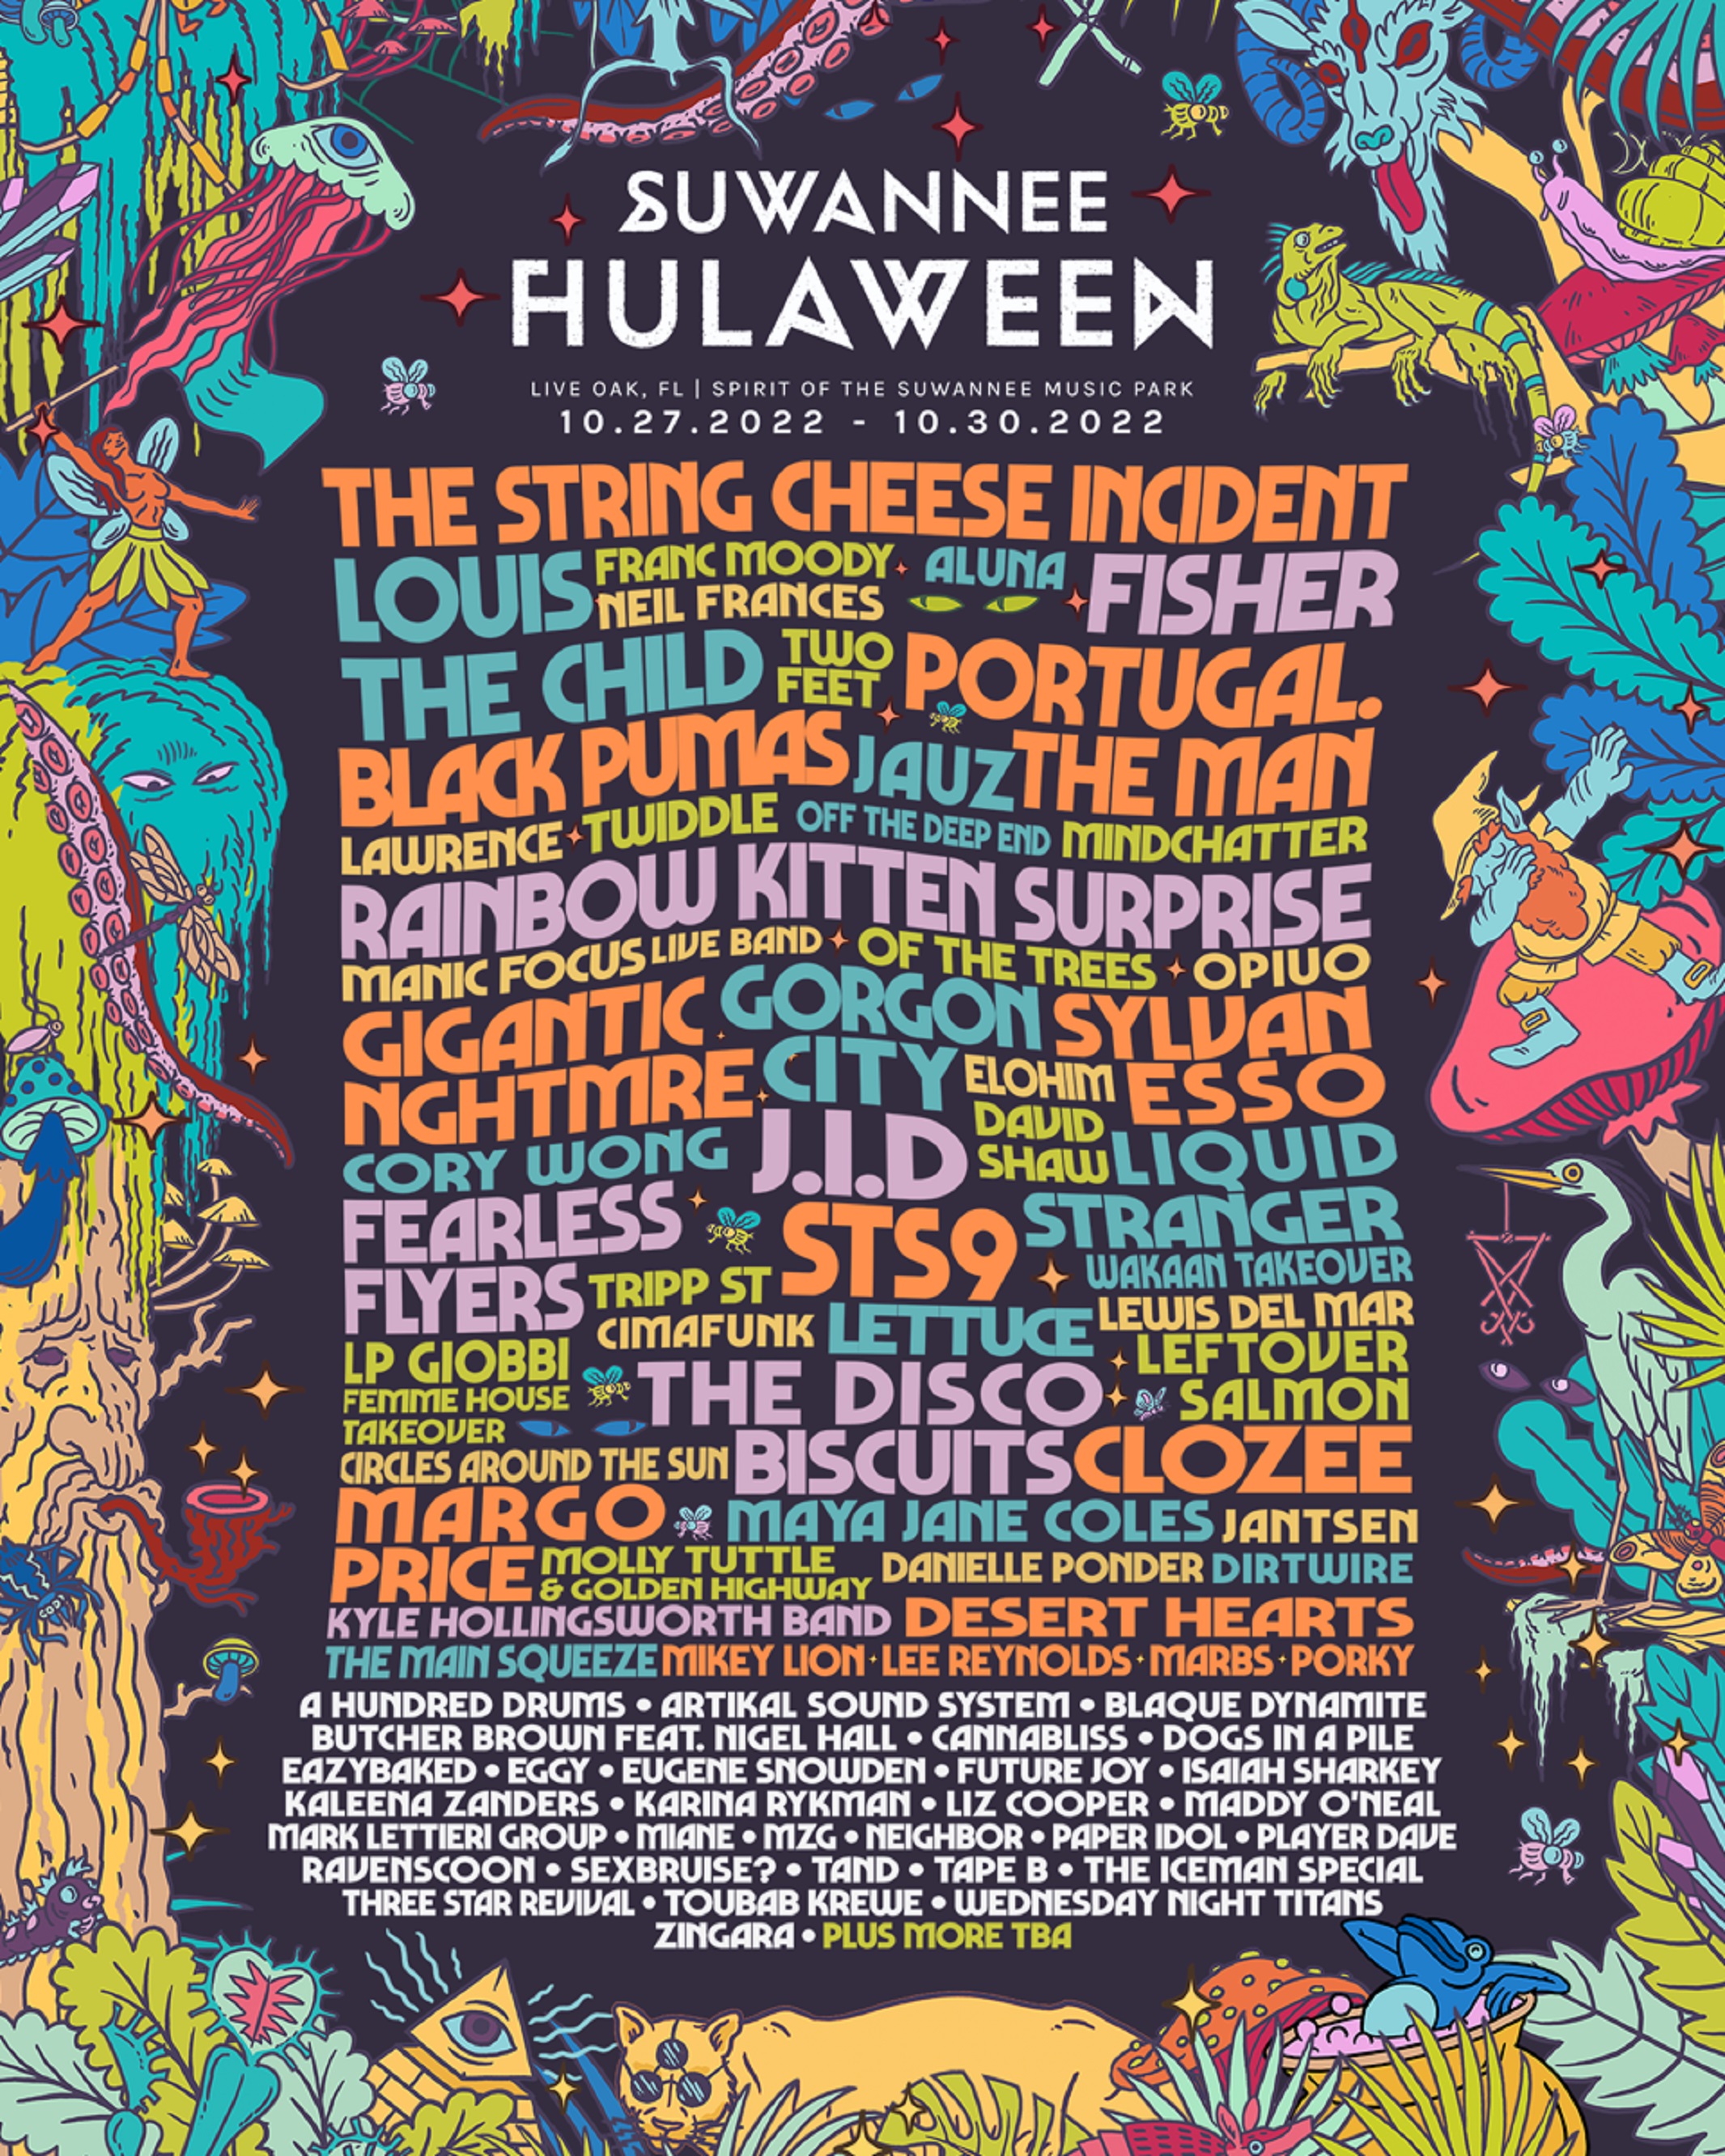 Suwannee Hulaween 2022 lineup: The String Cheese Incident, Black Pumas, Rainbow Kitten Surprise, CloZee, Fearless Flyers & more